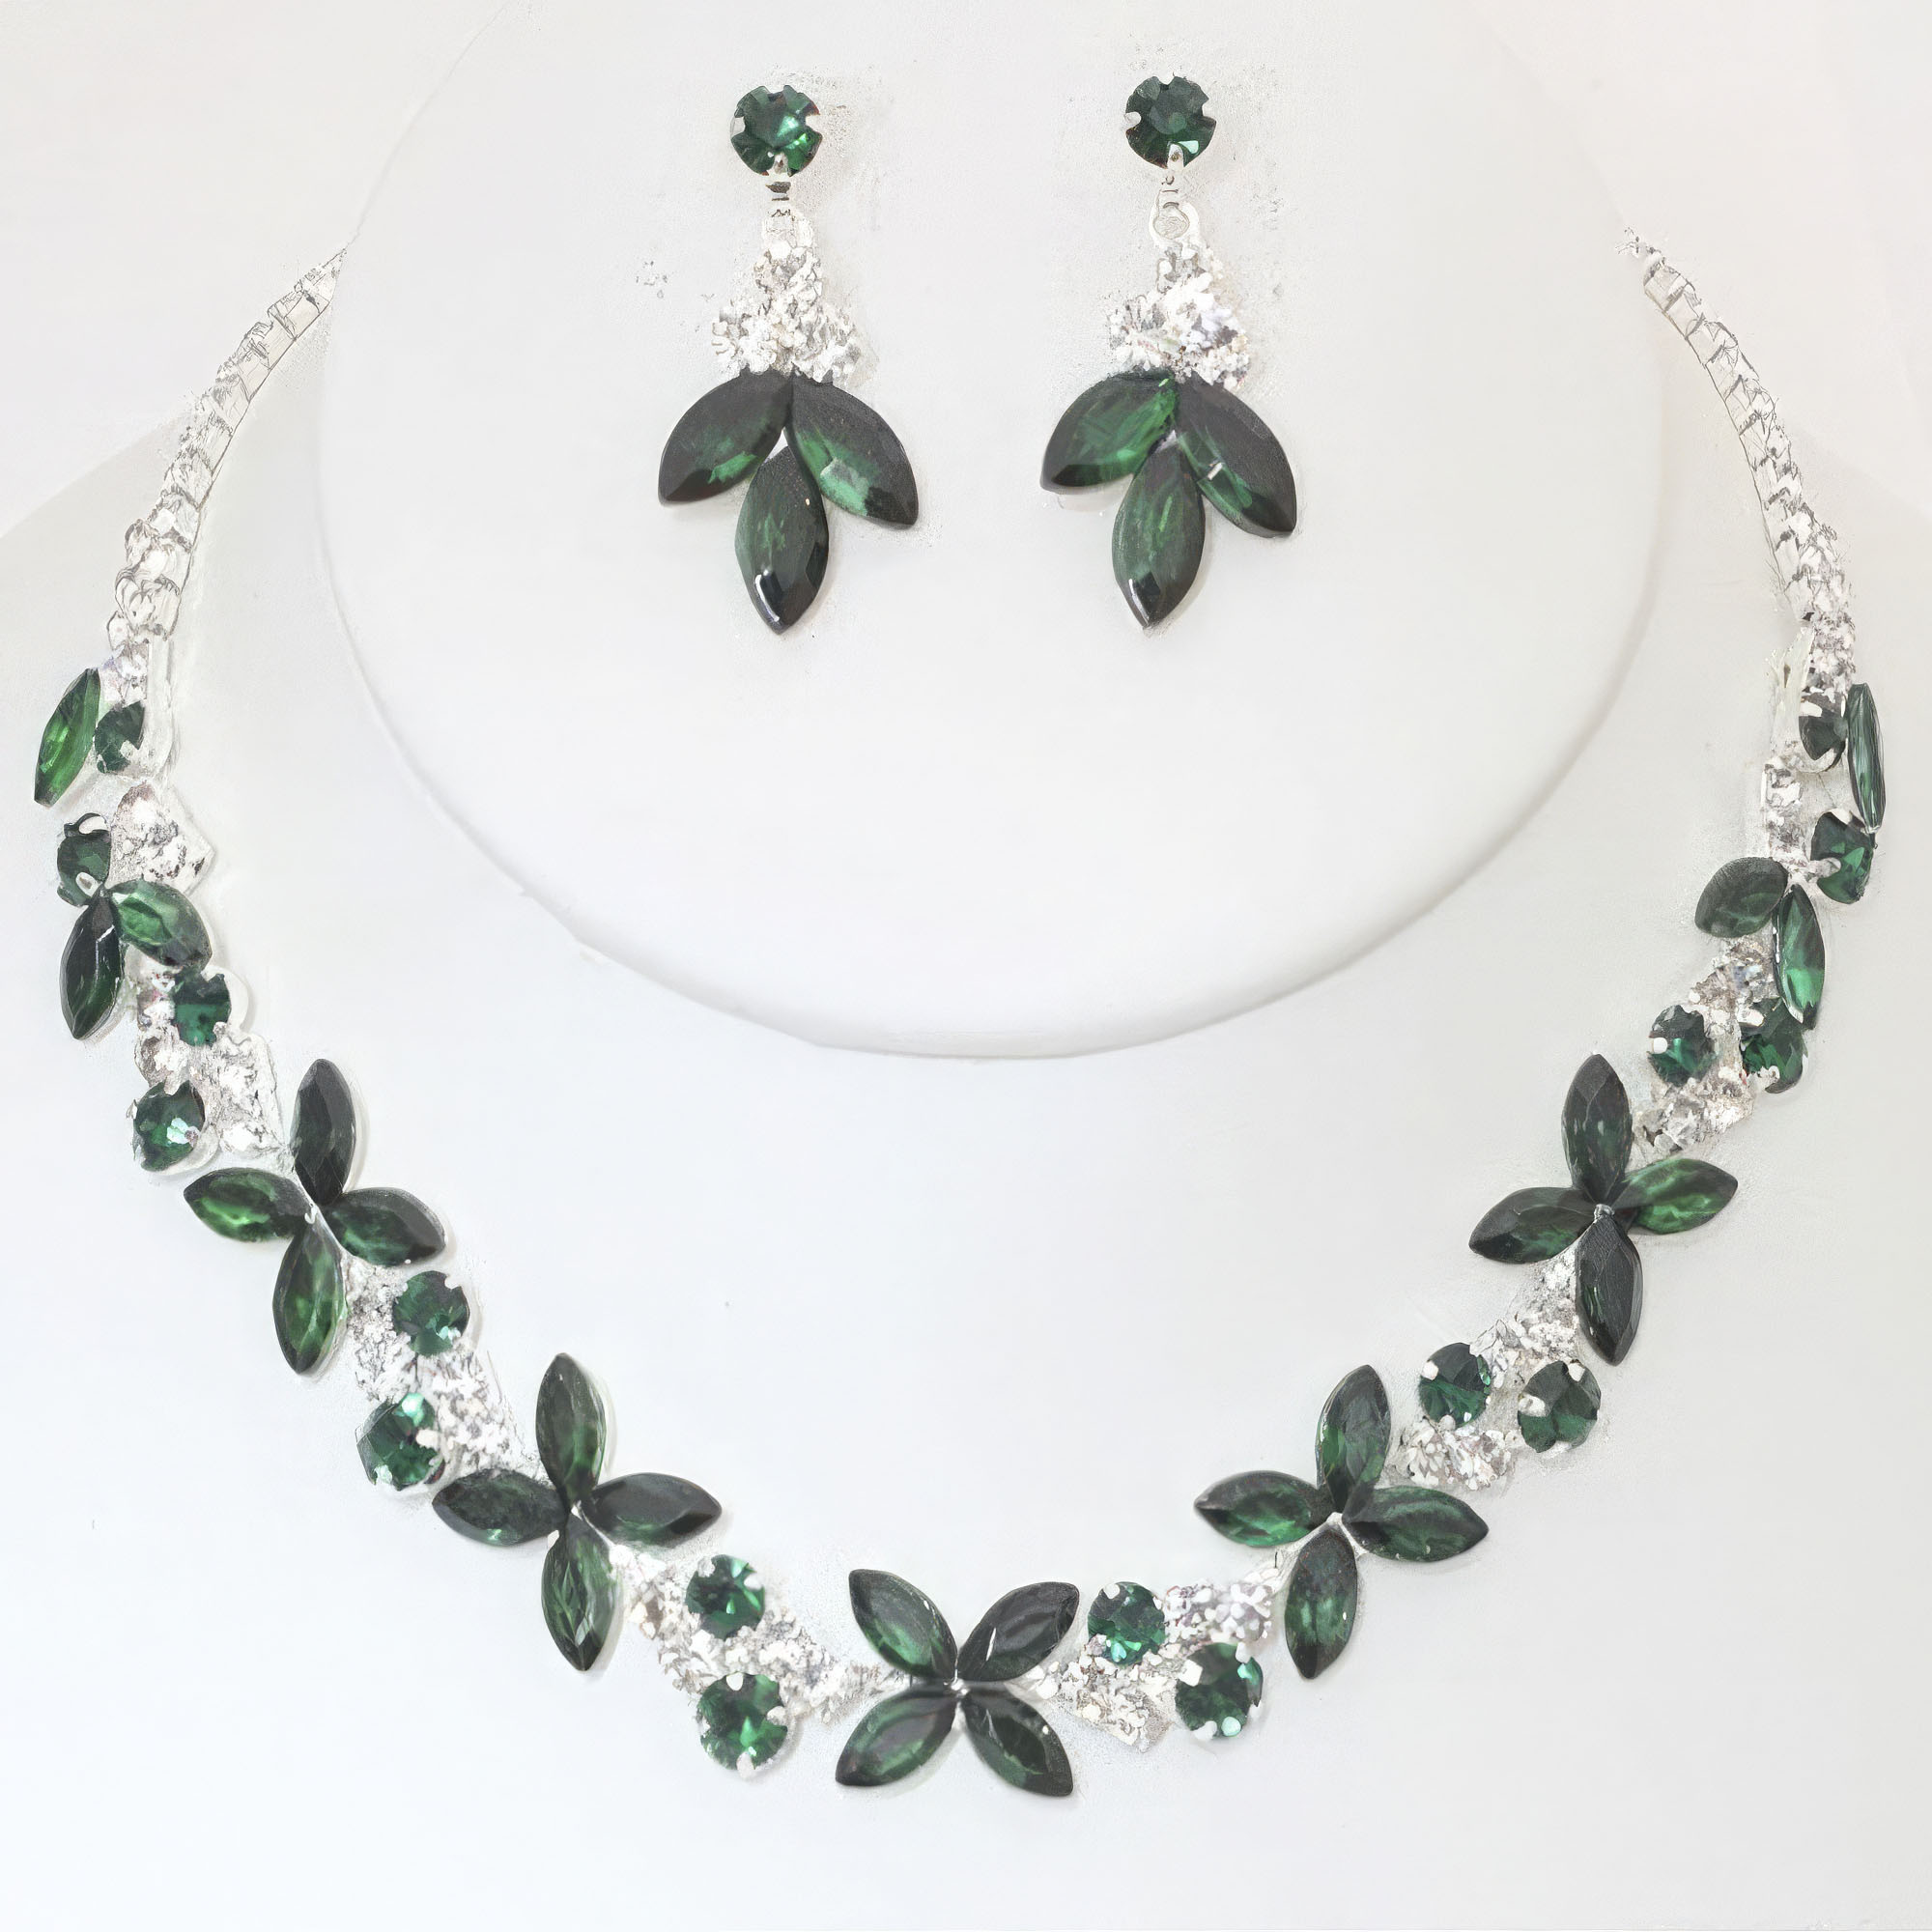 Rhinestone Crystal Necklace And Earring Set